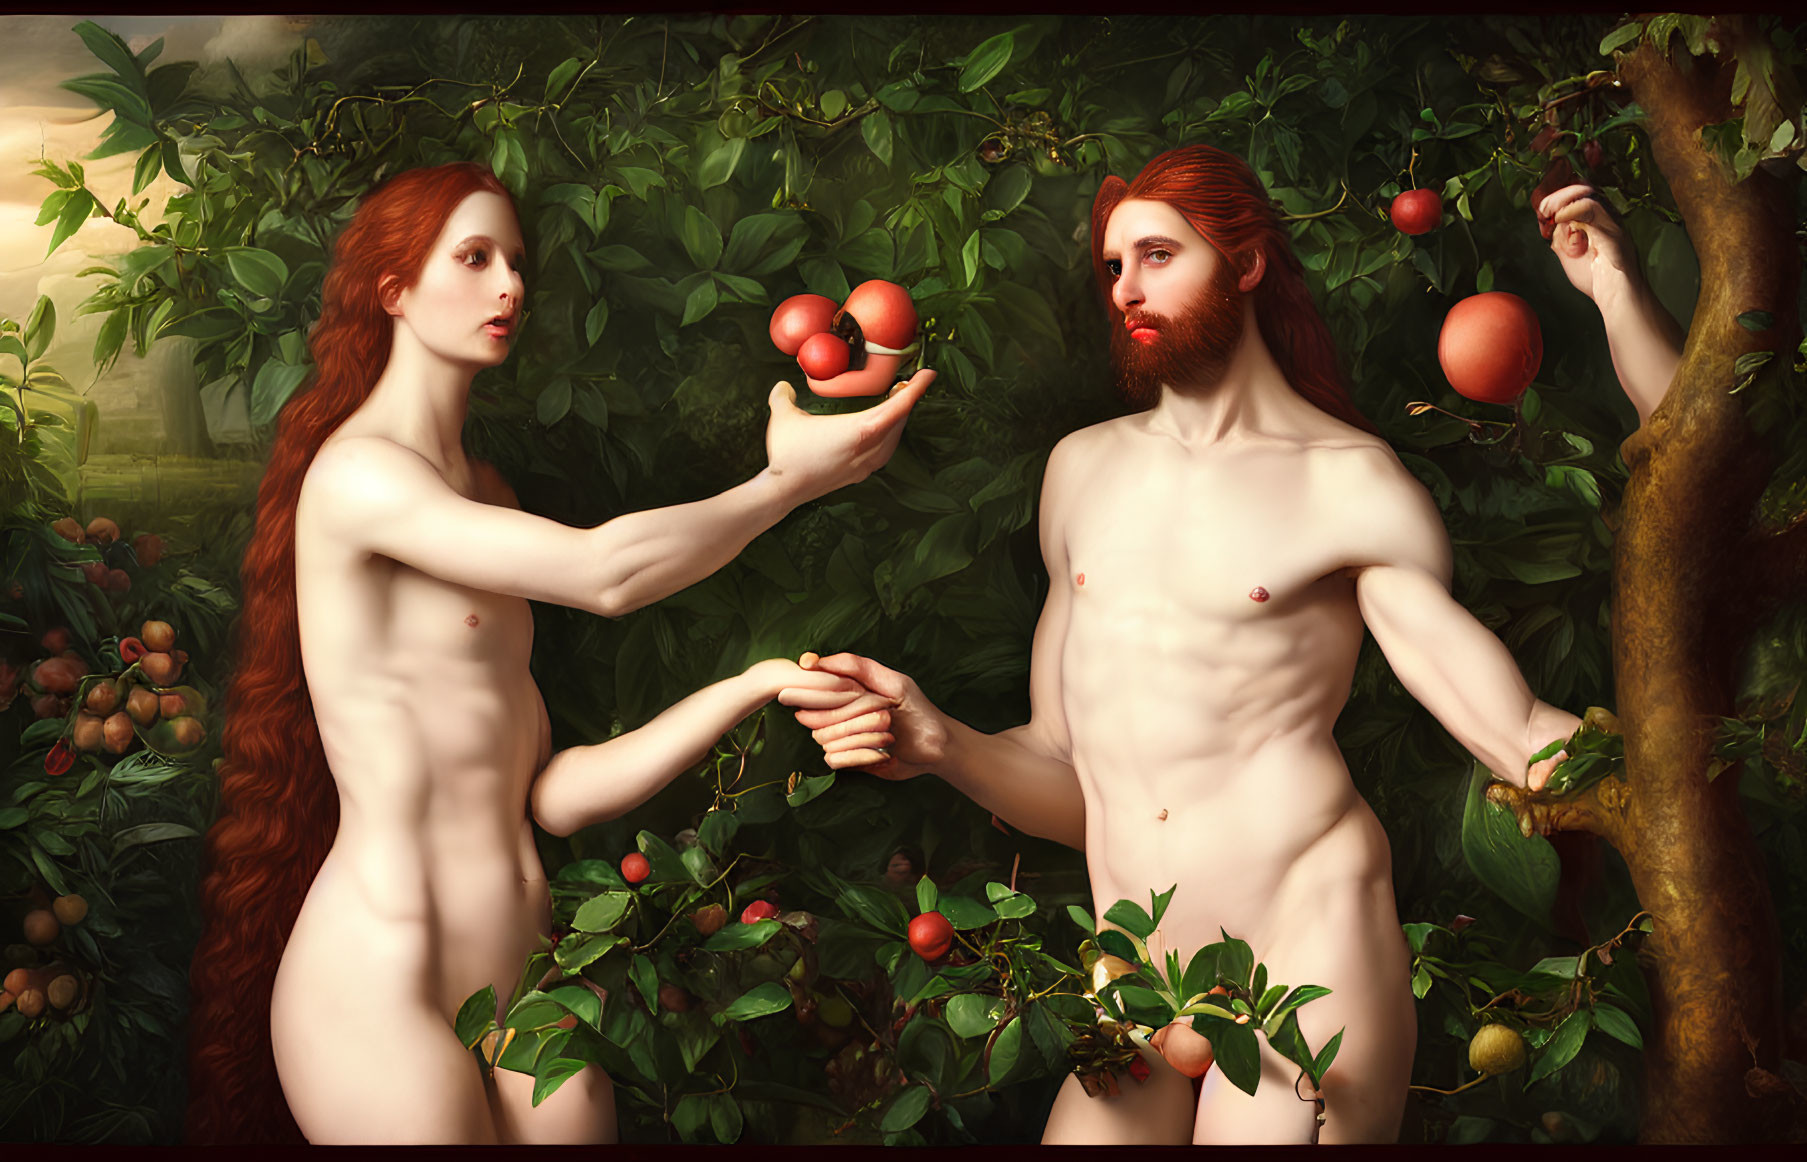 Nude figures with red hair in lush garden, woman offering fruit to man near apple tree reminiscent of